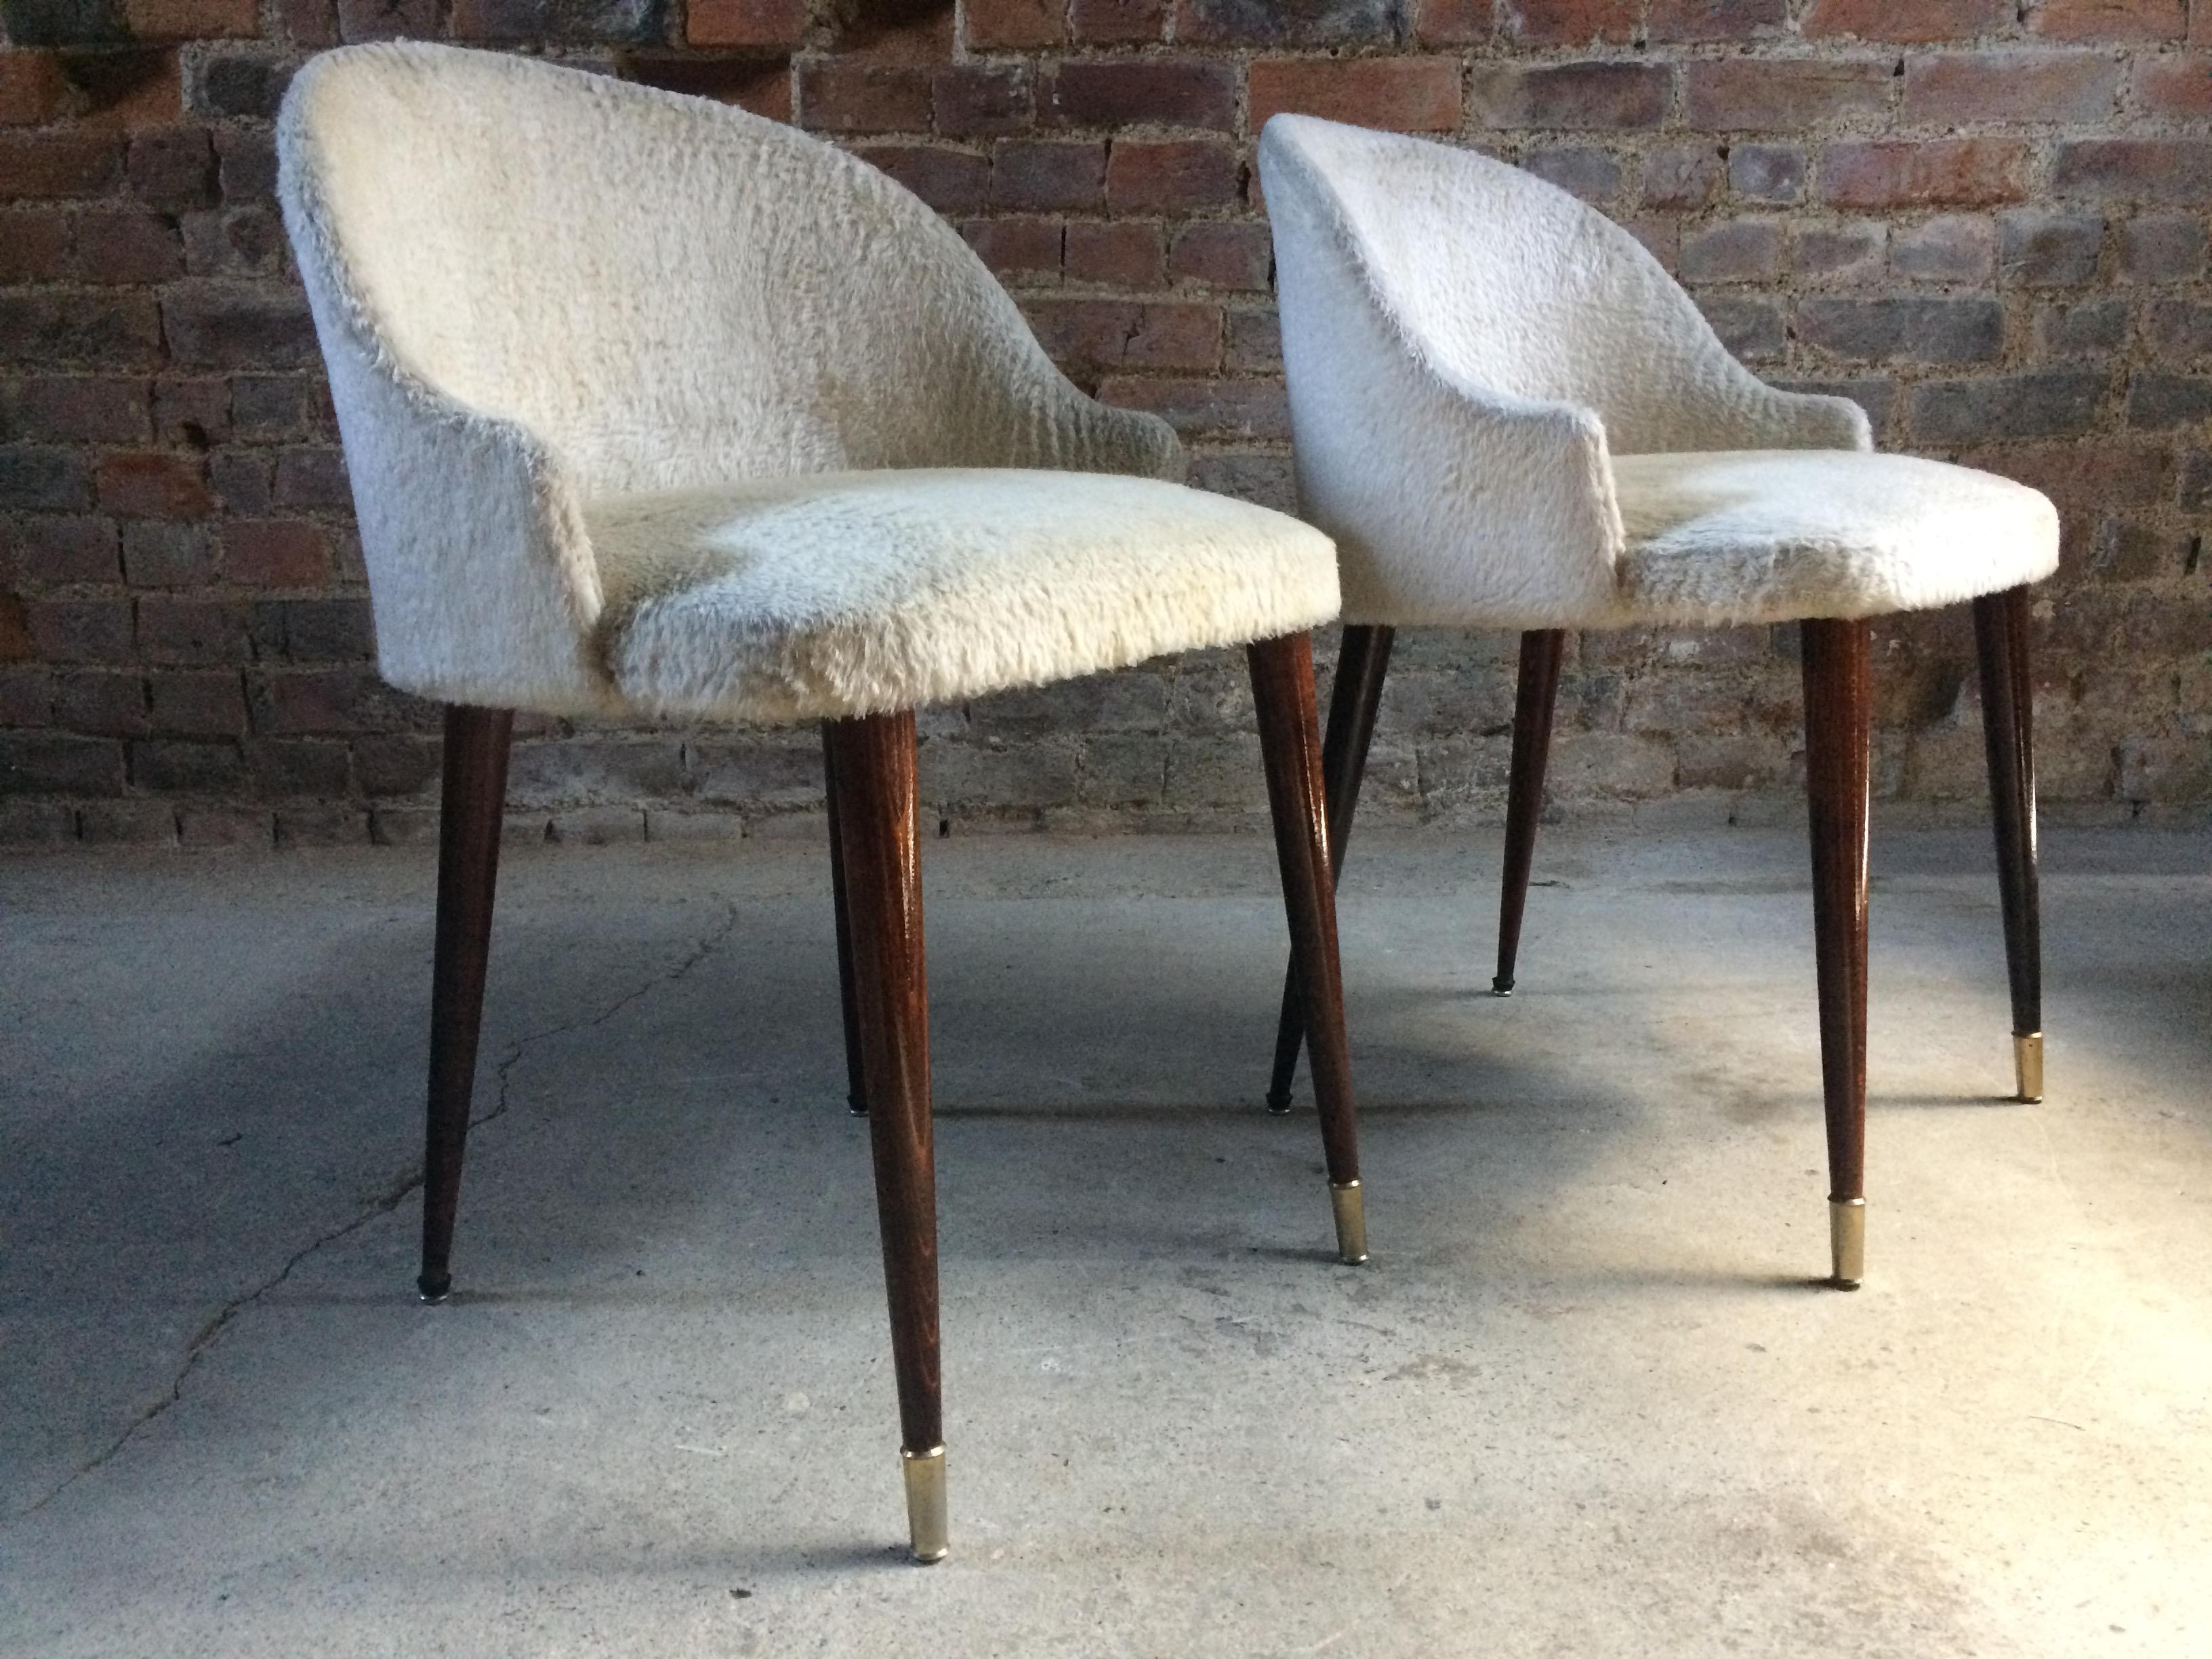 Stunning Italian cocktail chairs pair of ladies 1950s midcentury vintage

A fabulous pair of ever so dainty 1950s Italian cocktail chairs in the manner of Gin Ponti, upholstered in original faux fur fabric sitting on tall and elegant tapering legs